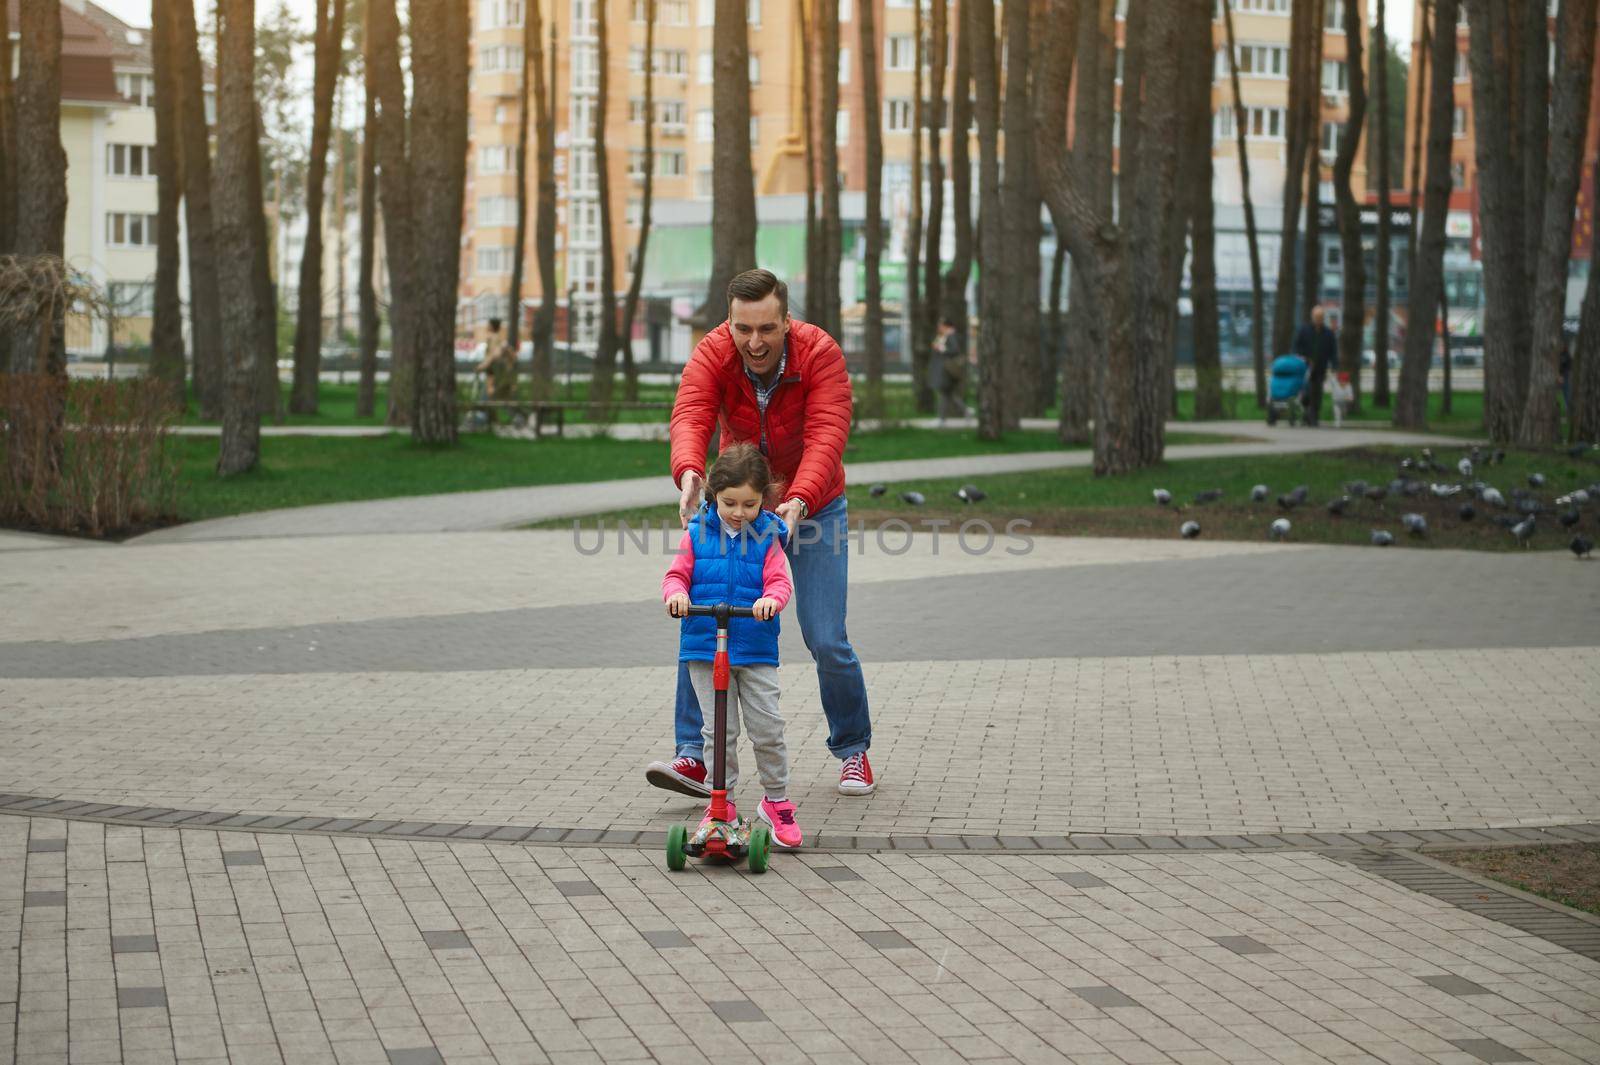 Cheerful dad running beside his cute daughter riding a push scooter, enjoying day off in a city park. Father's Day, happy childhood concept by artgf